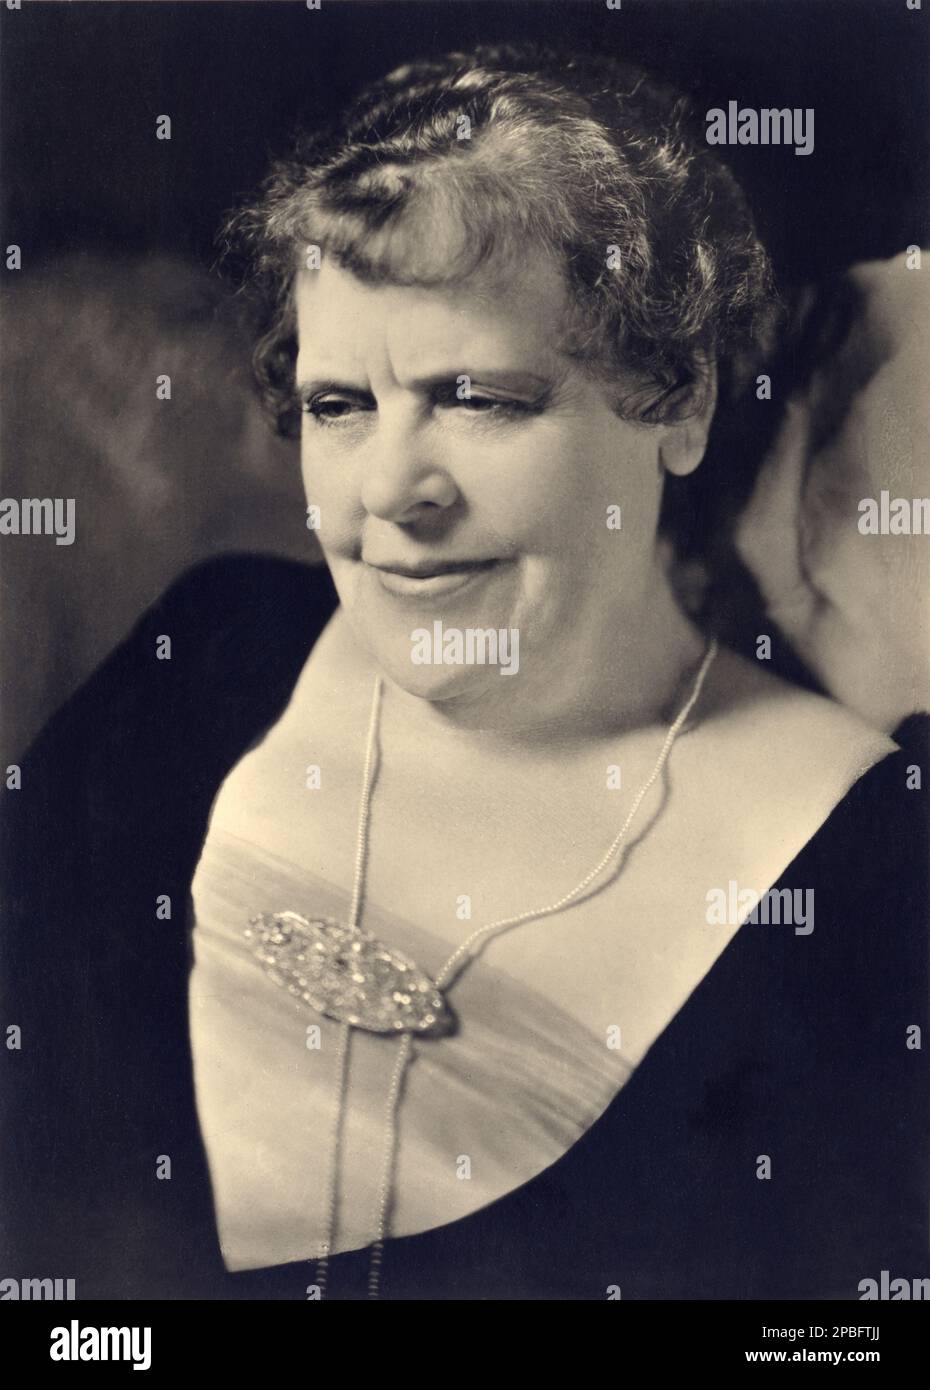 1933 : The actress MARIE DRESSLER ( 1868, Cobourg, Ontario, Canada  - 1934, Santa Barbara, California, USA ) in DINNER AT EIGHT ( PRANZO ALLE OTTO ) by George Cukor , from a play by Edna Ferber and  George S. Kaufman - MGM - SILENT MOVIE - FILM - CINEMA MUTO - portrait - ritratto - PORTRAIT - brutta - necklace - collana - spilla - pin - FILM  ----  Archivio GBB Stock Photo